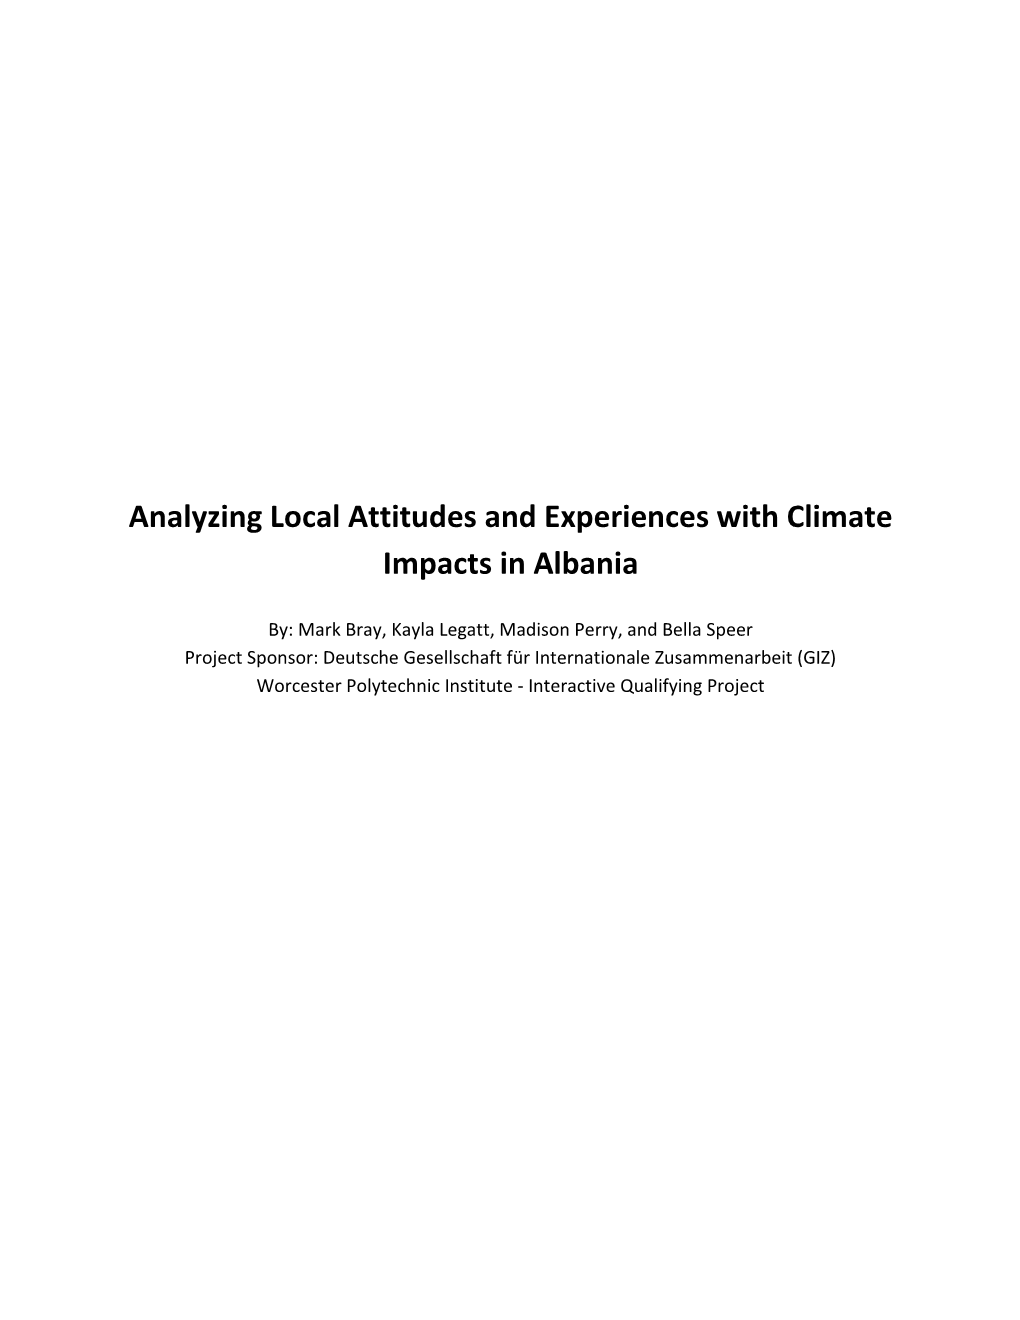 Analyzing Local Attitudes and Experiences with Climate Impacts in Albania